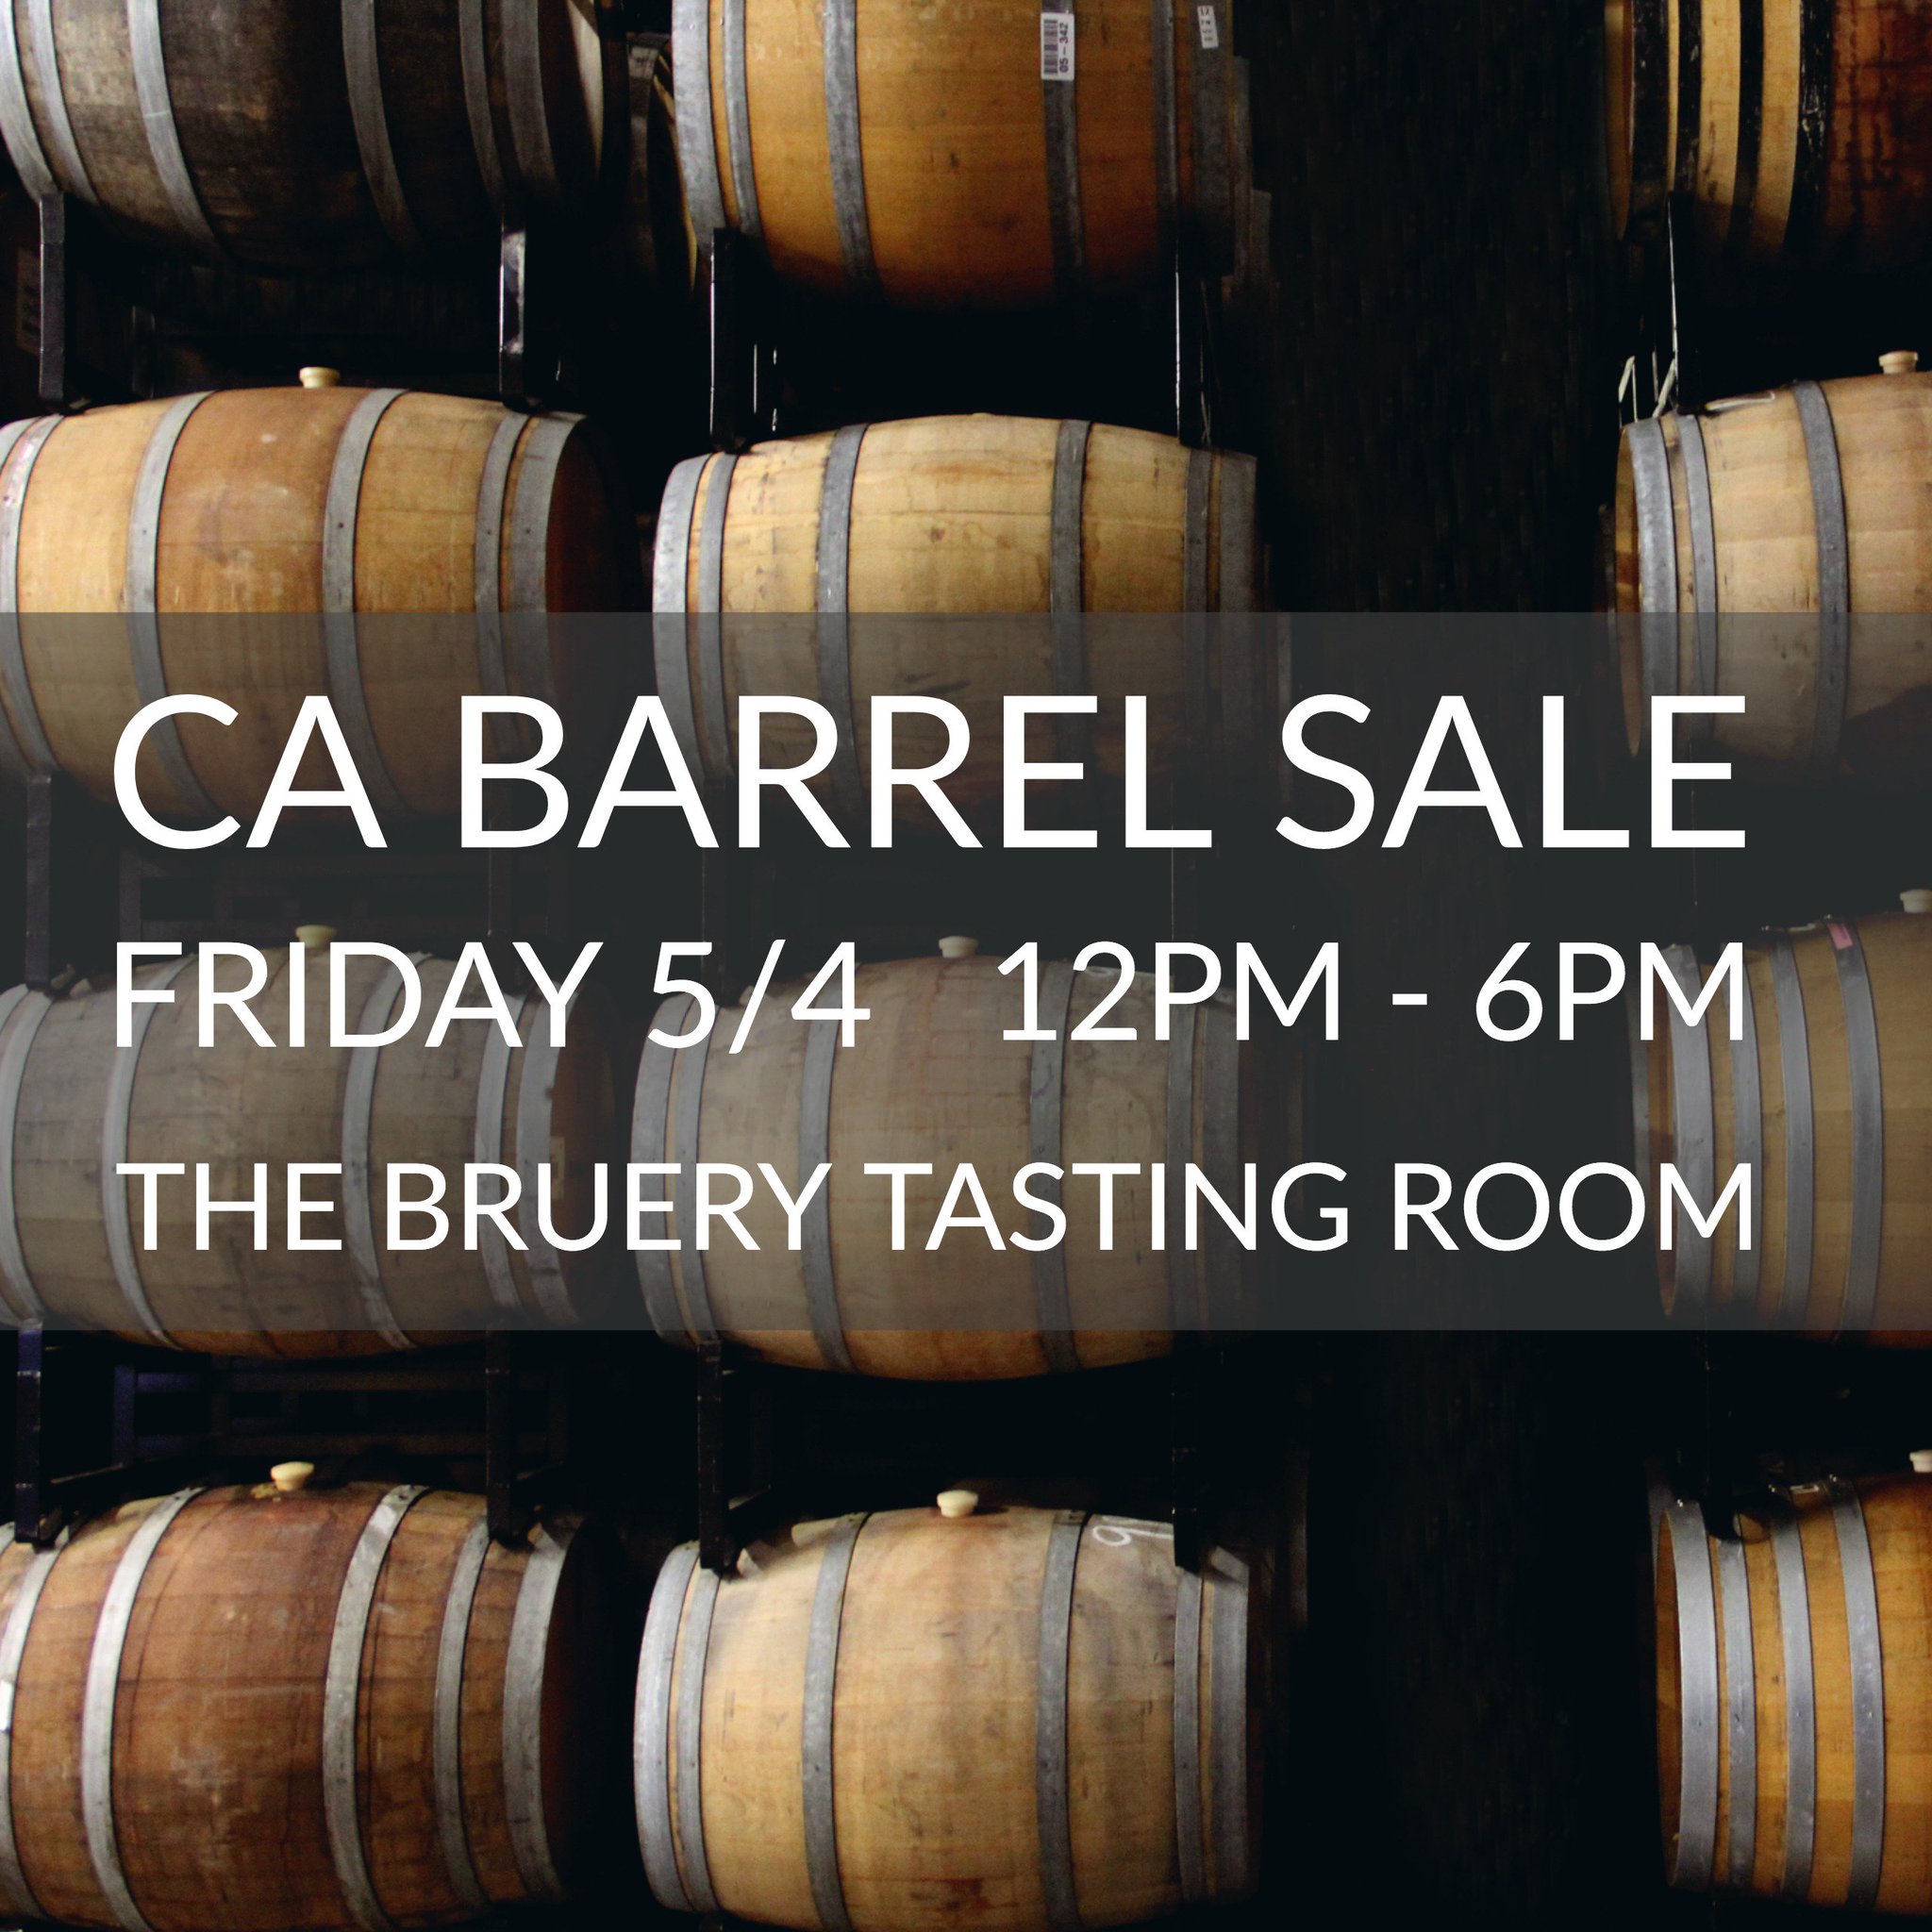 The Bruery On Twitter We Re Holding A Barrel Sale At Our